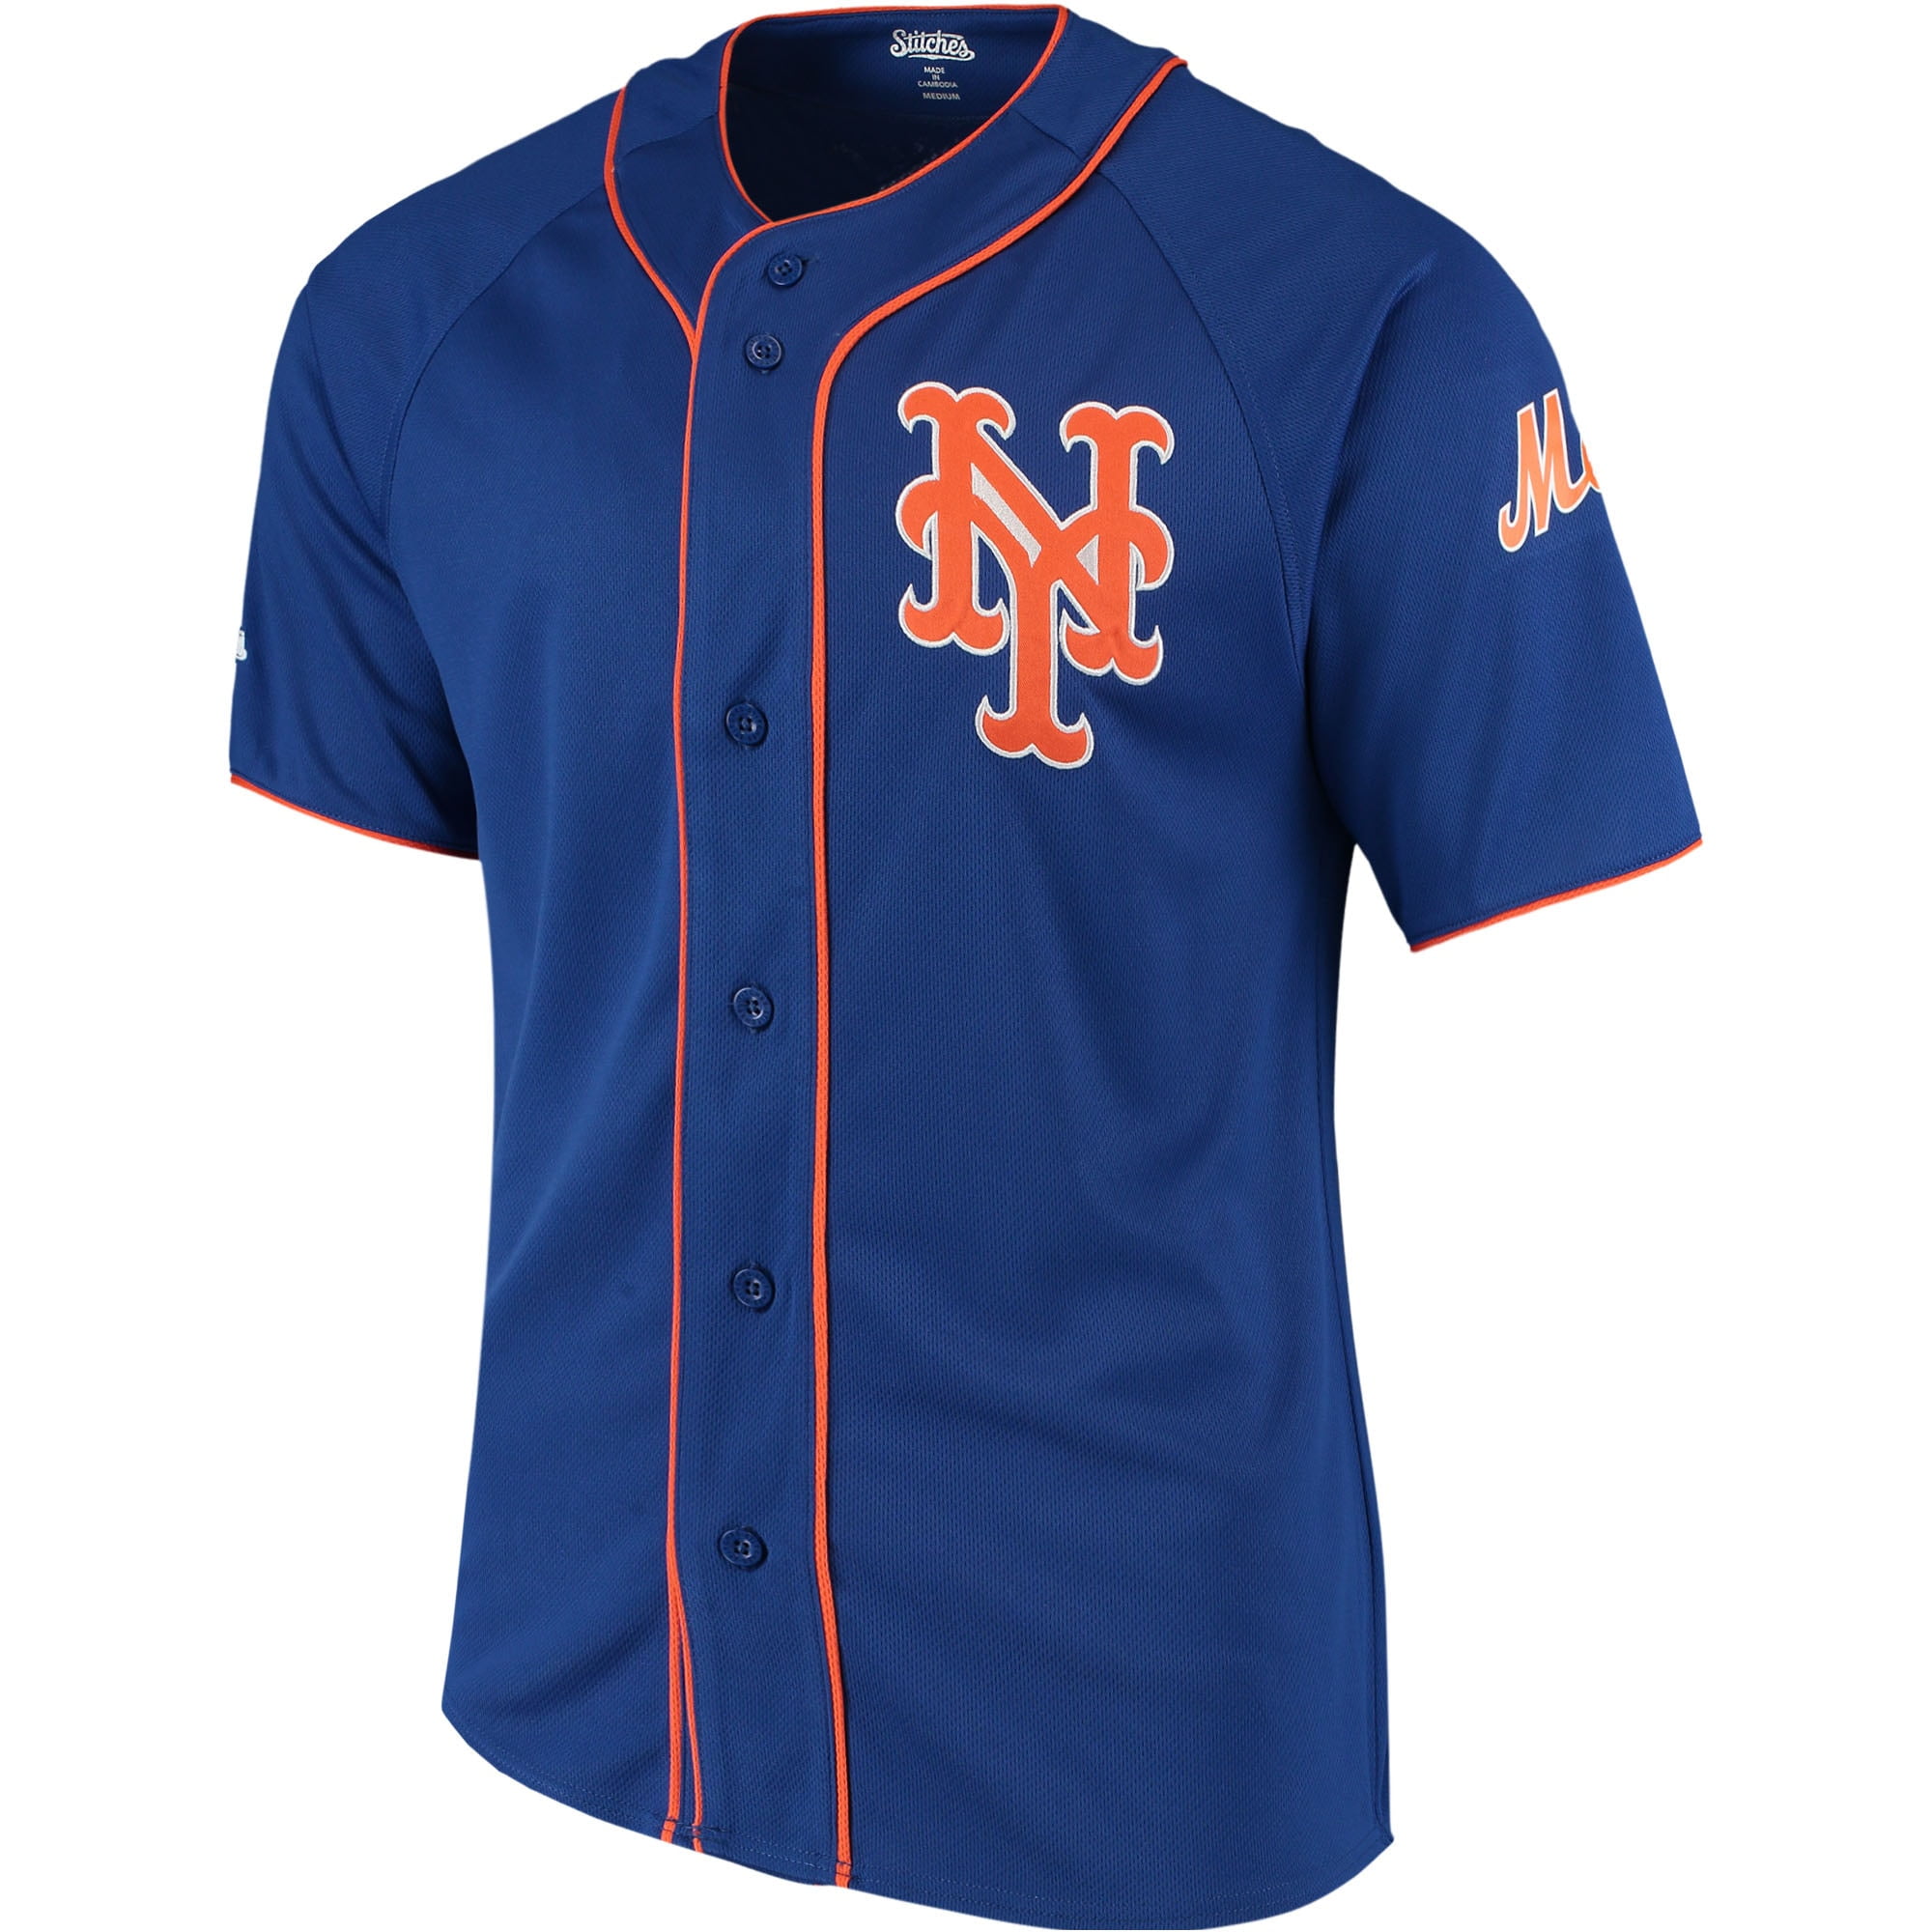 DDSEWHAPPYSCRUBS Baseball Size 2x New York Mets Medical Scrub Top Unisex Style Shirt for Men & Women *In Stock *Ready to Ship